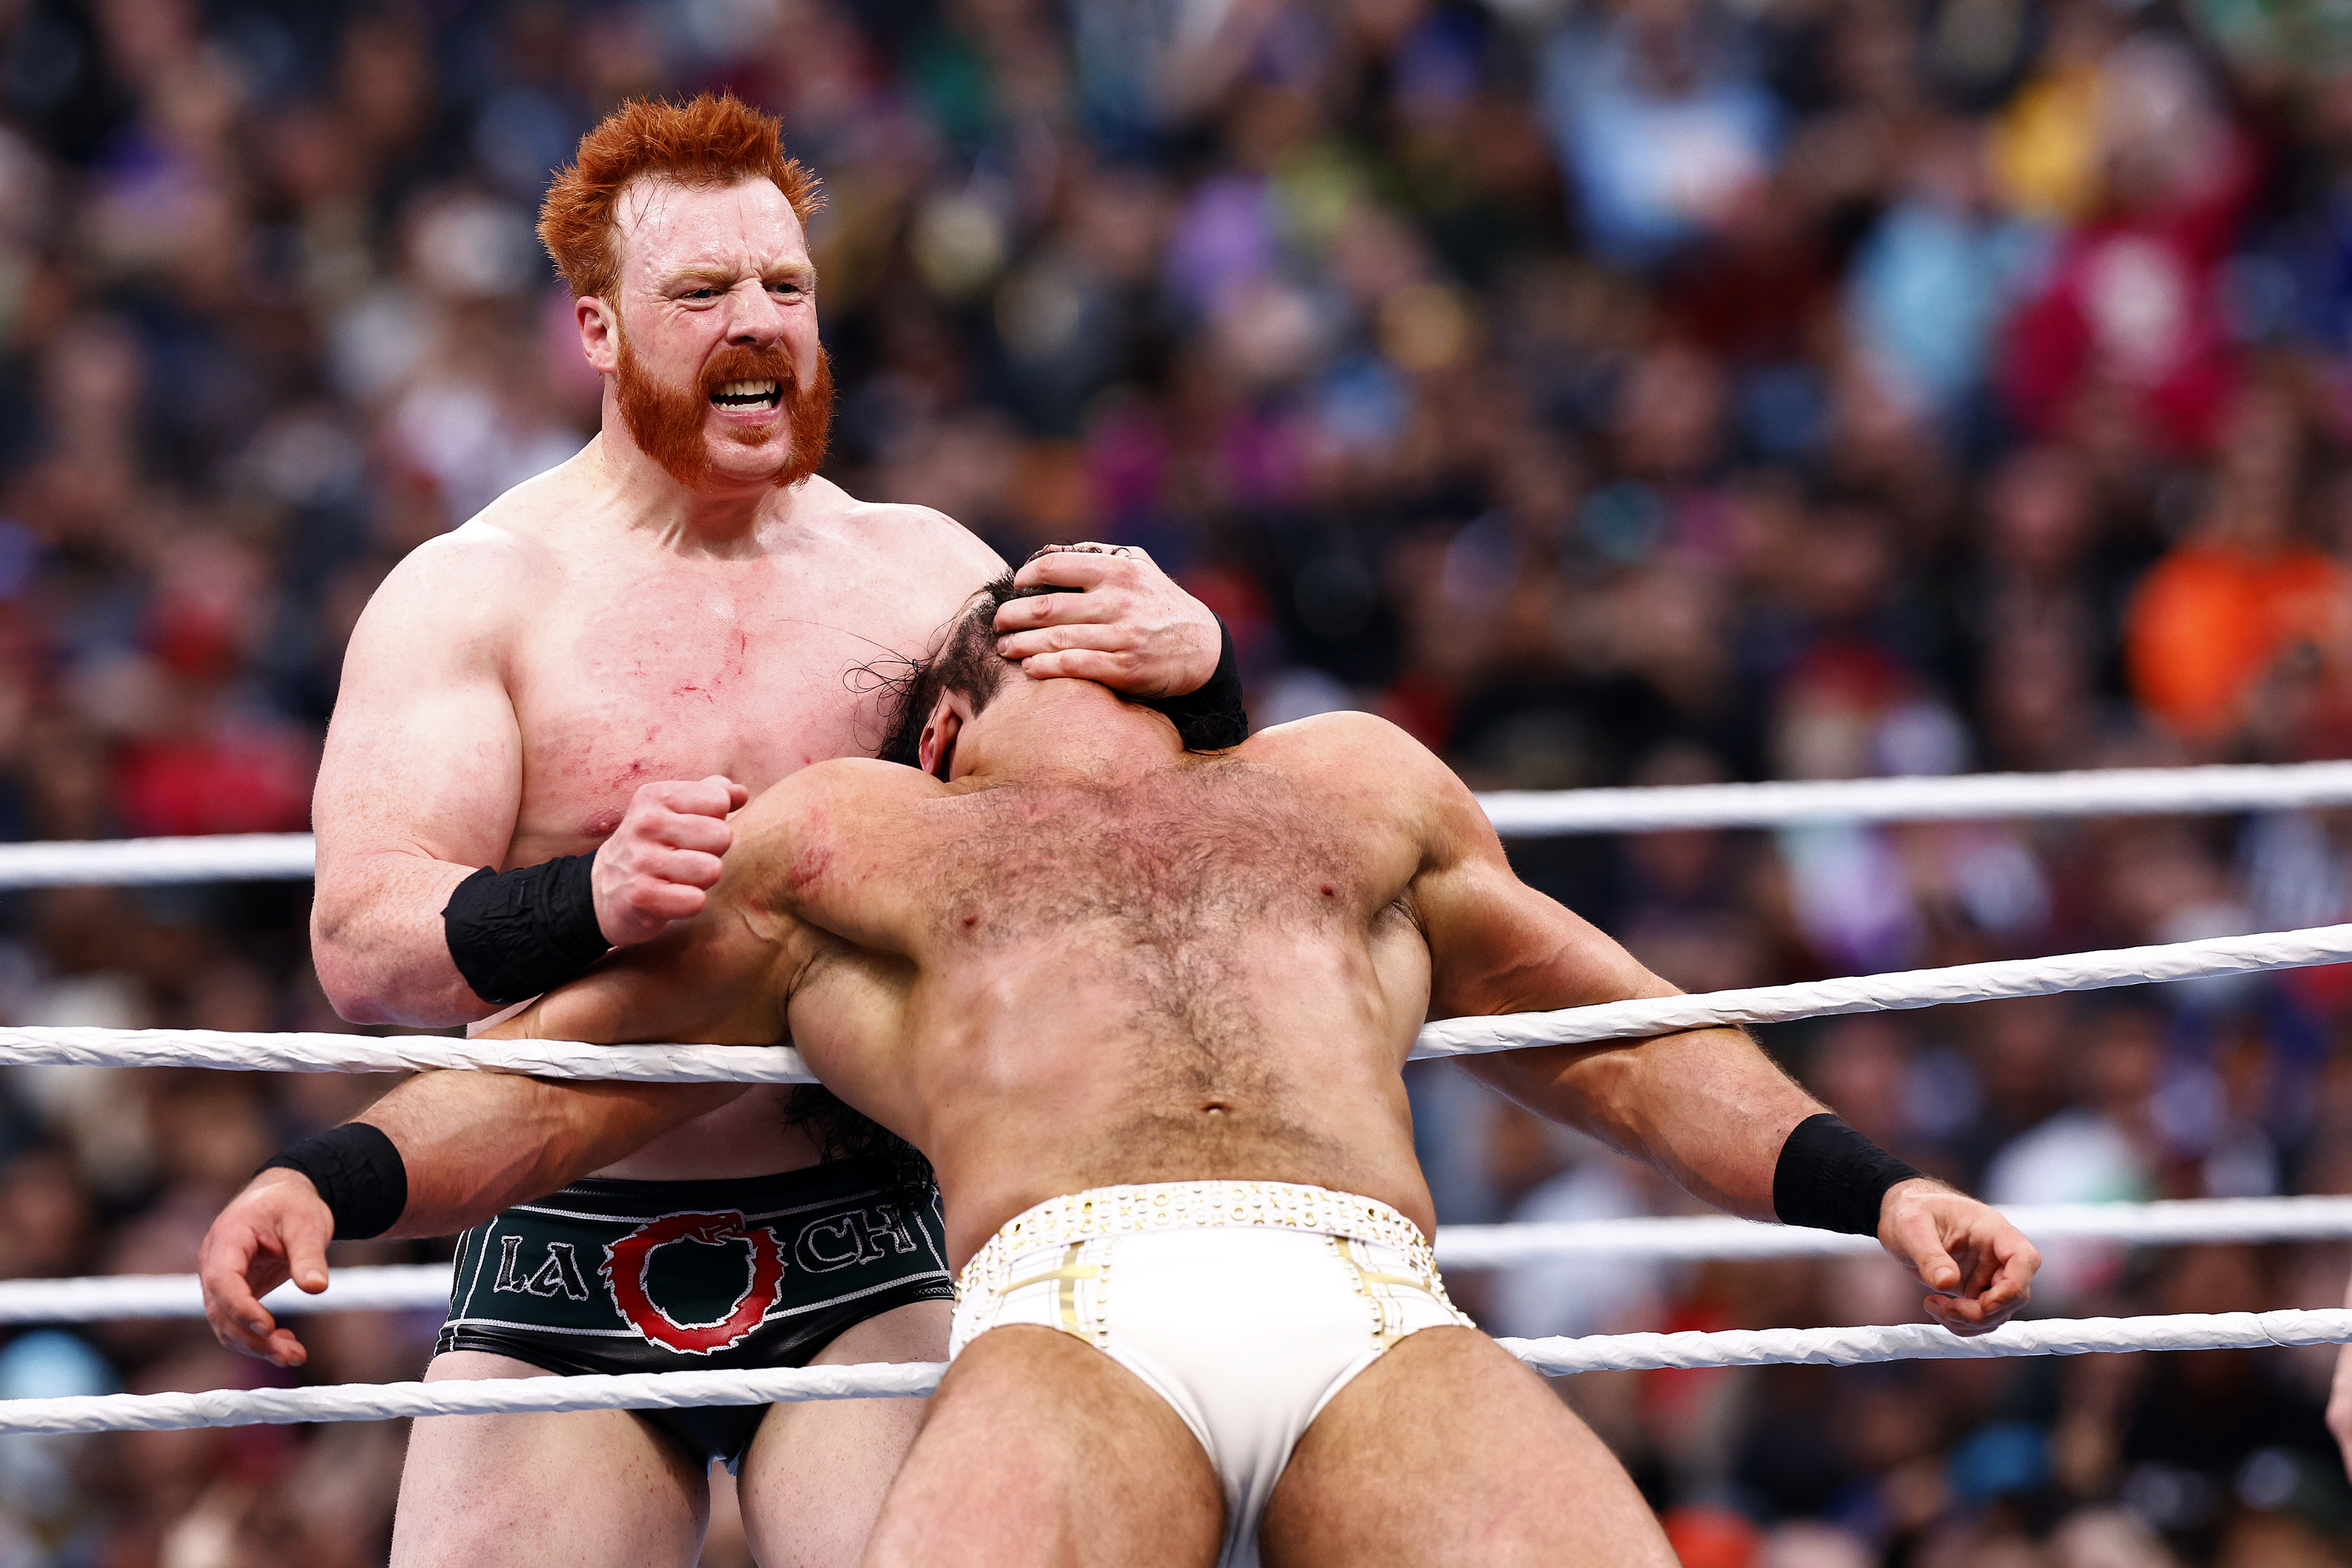 Sheamus wrestles Drew McIntyre in triple threat for the WWE Intercontinental Title during WrestleMania Goes Hollywood at SoFi Stadium on April 02, 2023 in Inglewood, California.